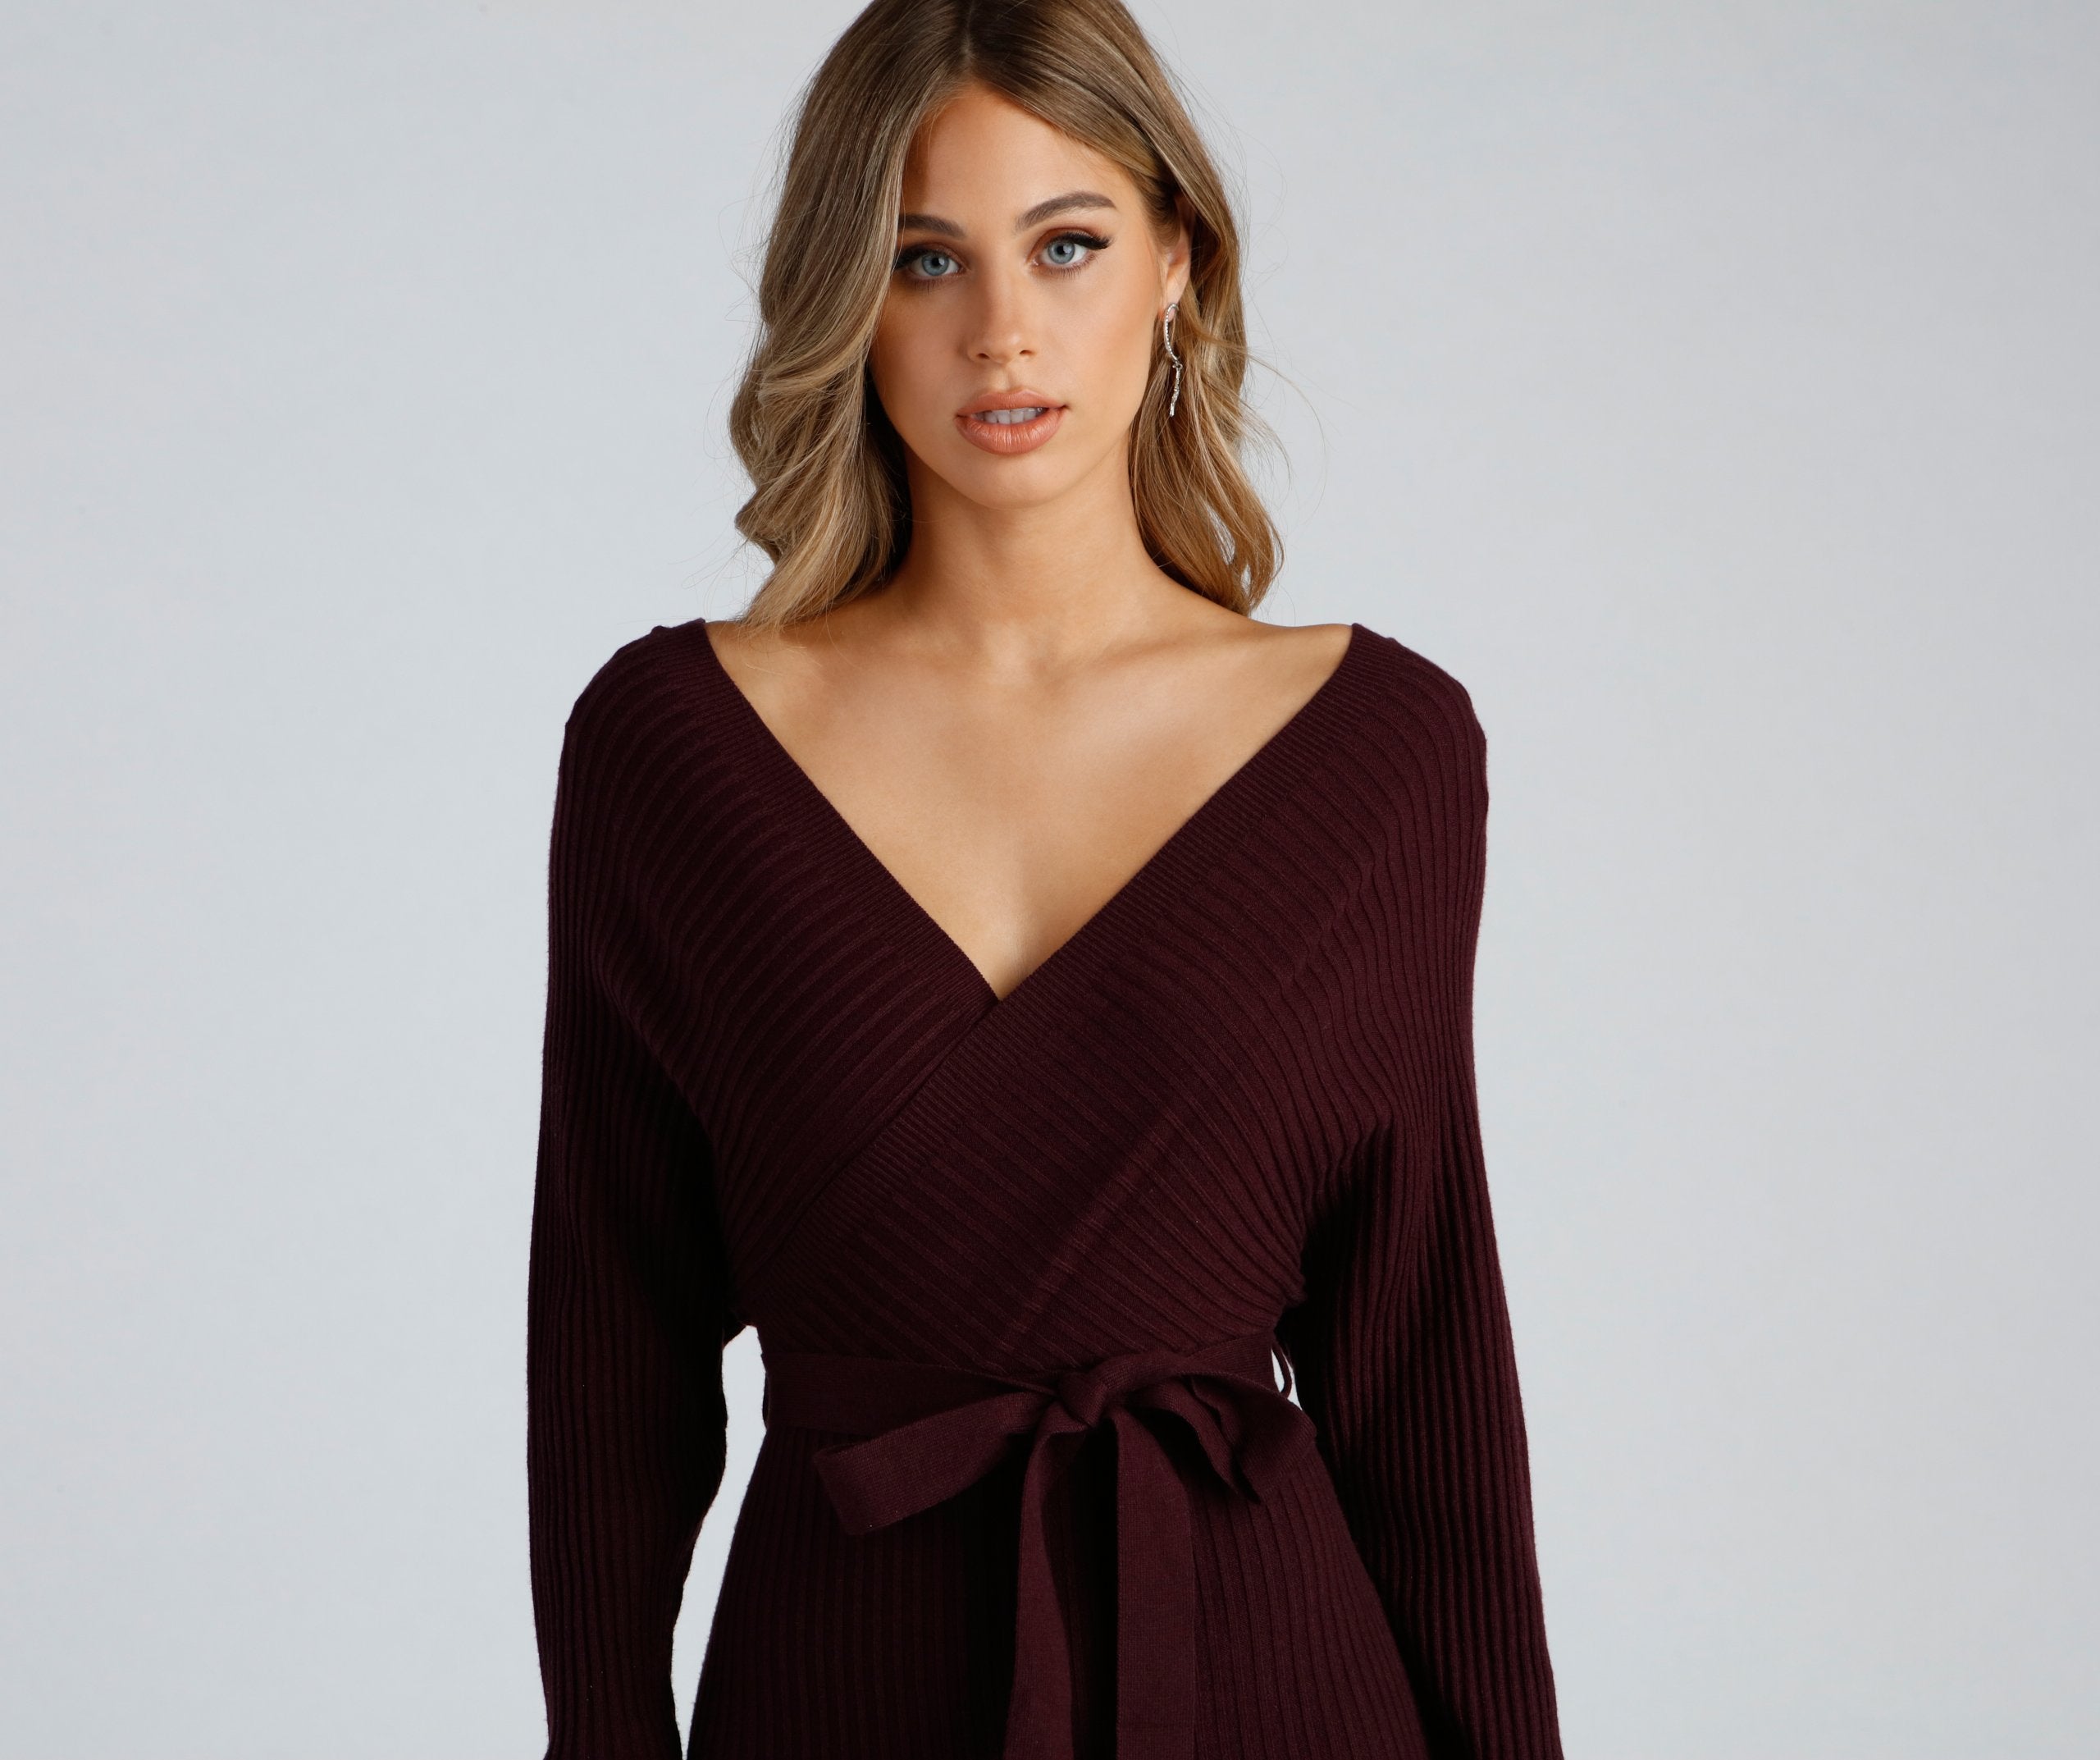 Ribbed Knit Tie-Front Mini Sweater Dresses